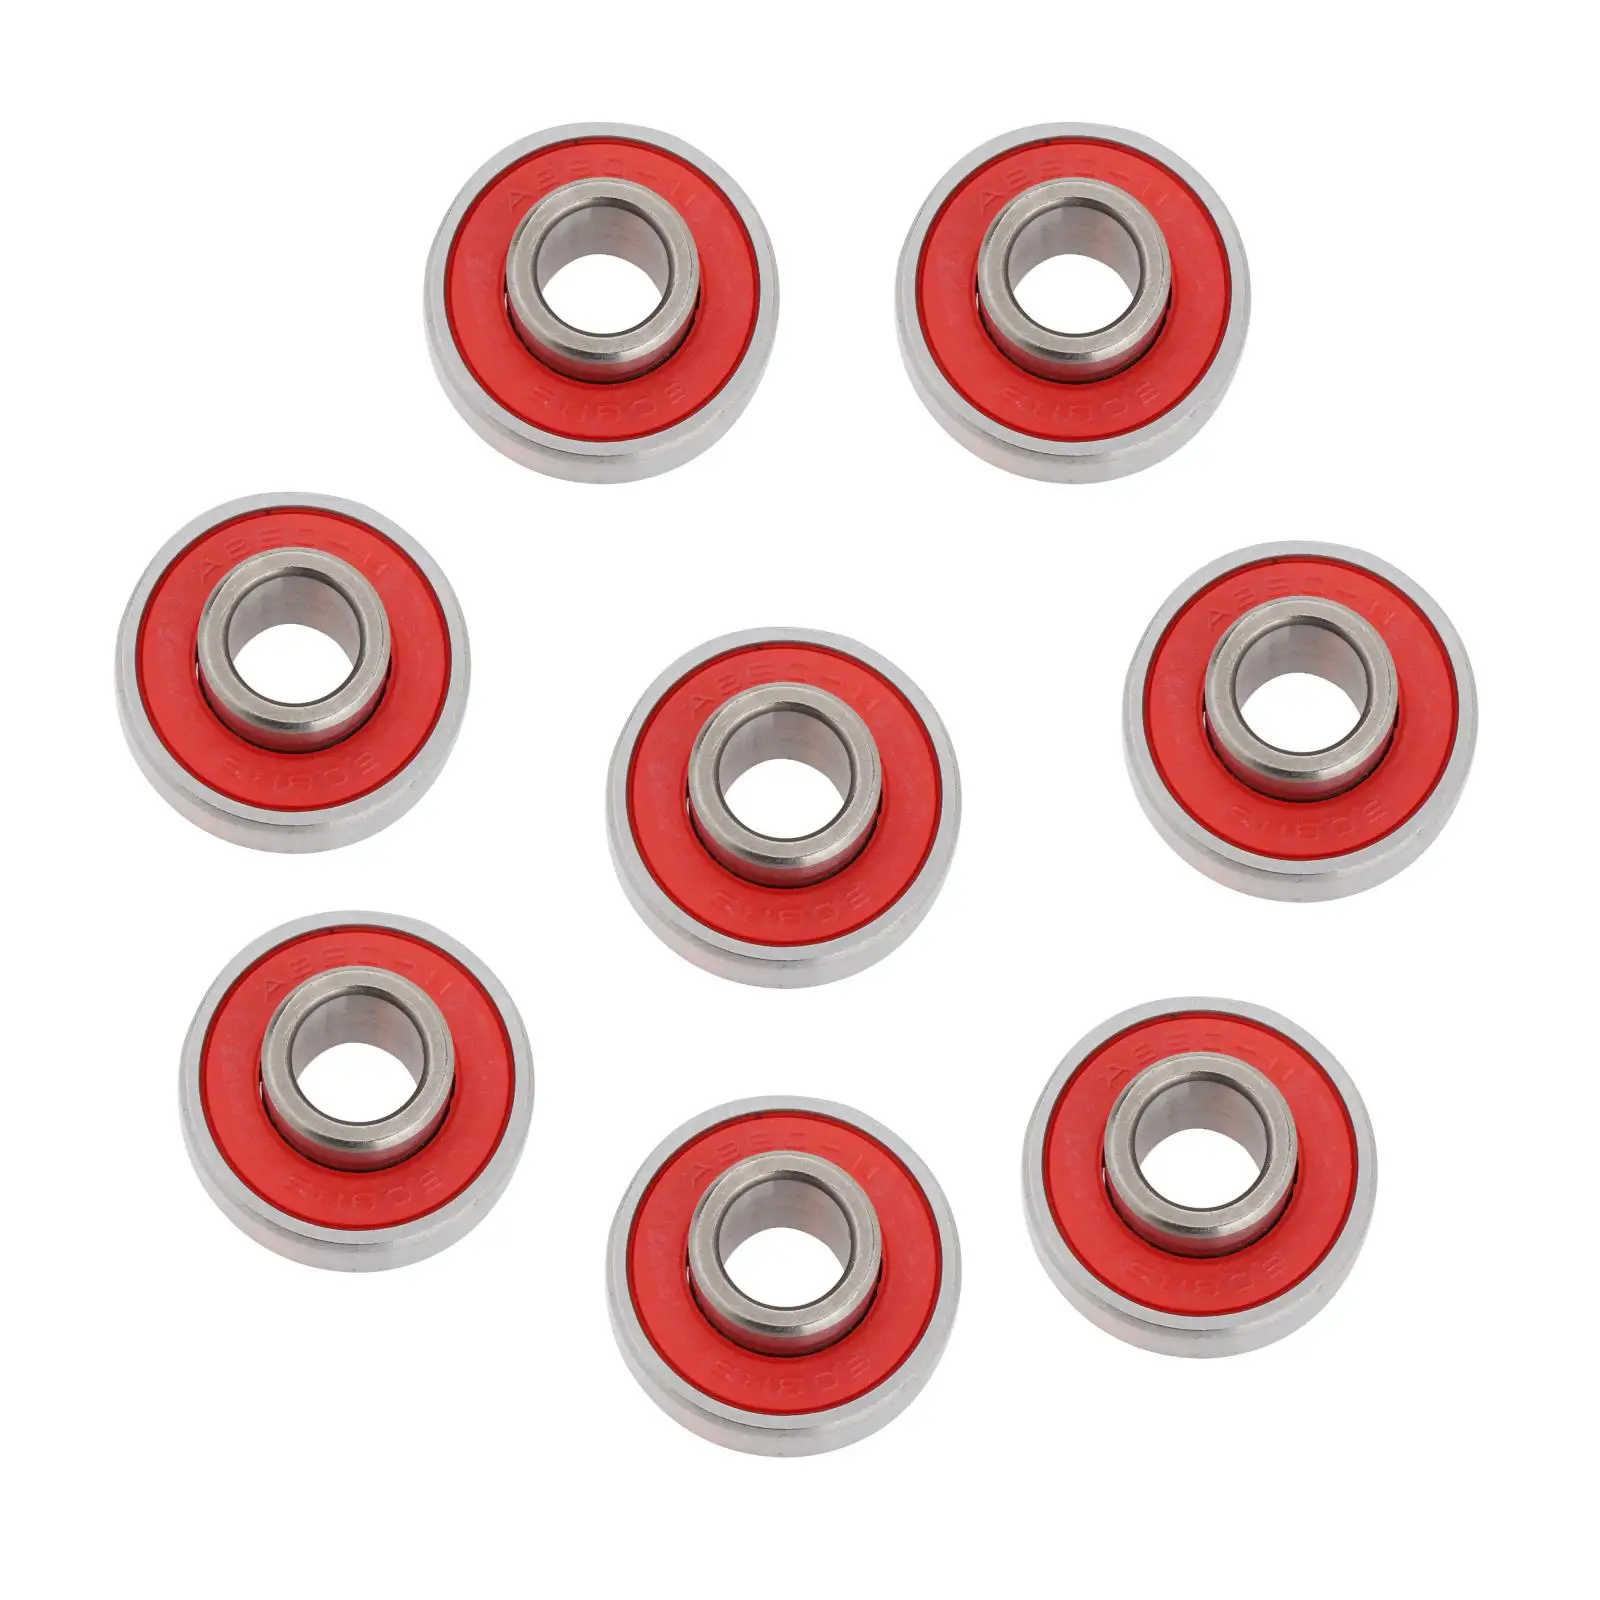 High Speed 608 2RS Bearings (Pack of 8) with Built-in Spacer for Inline Skate or Skateboard Scooter Longboard